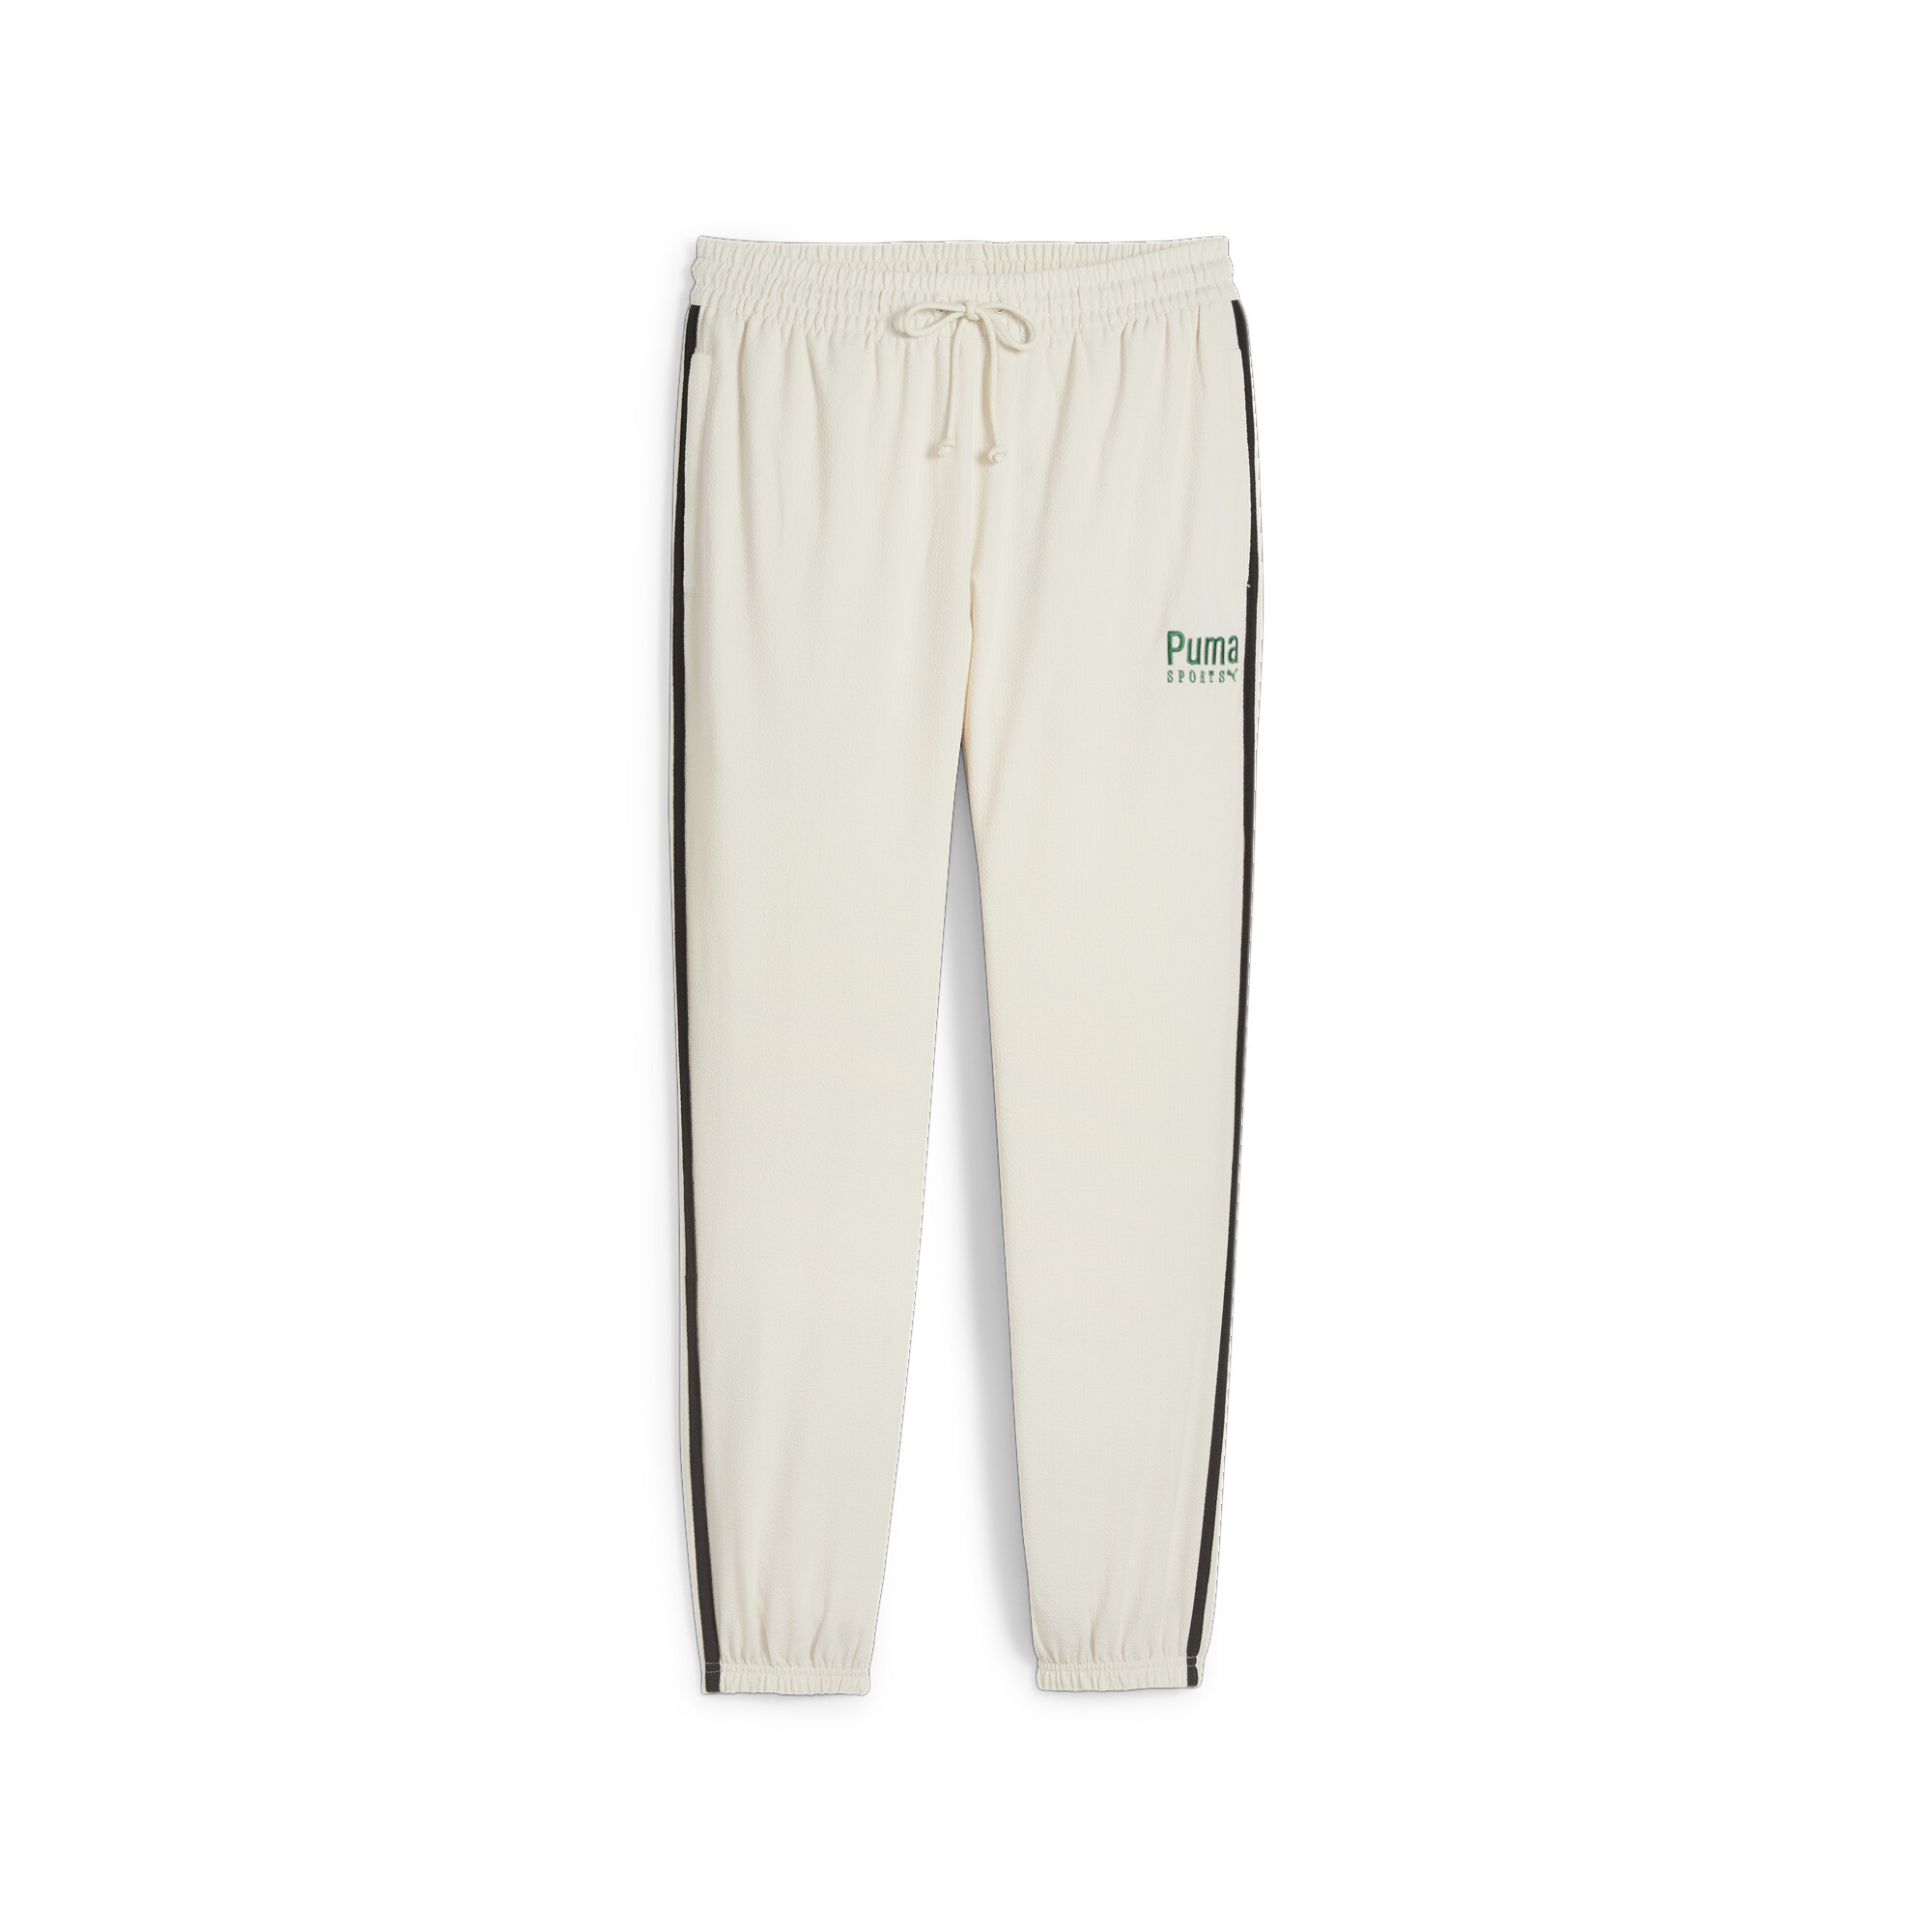 Men's PUMA TEAM Track Pants In White, Size XS